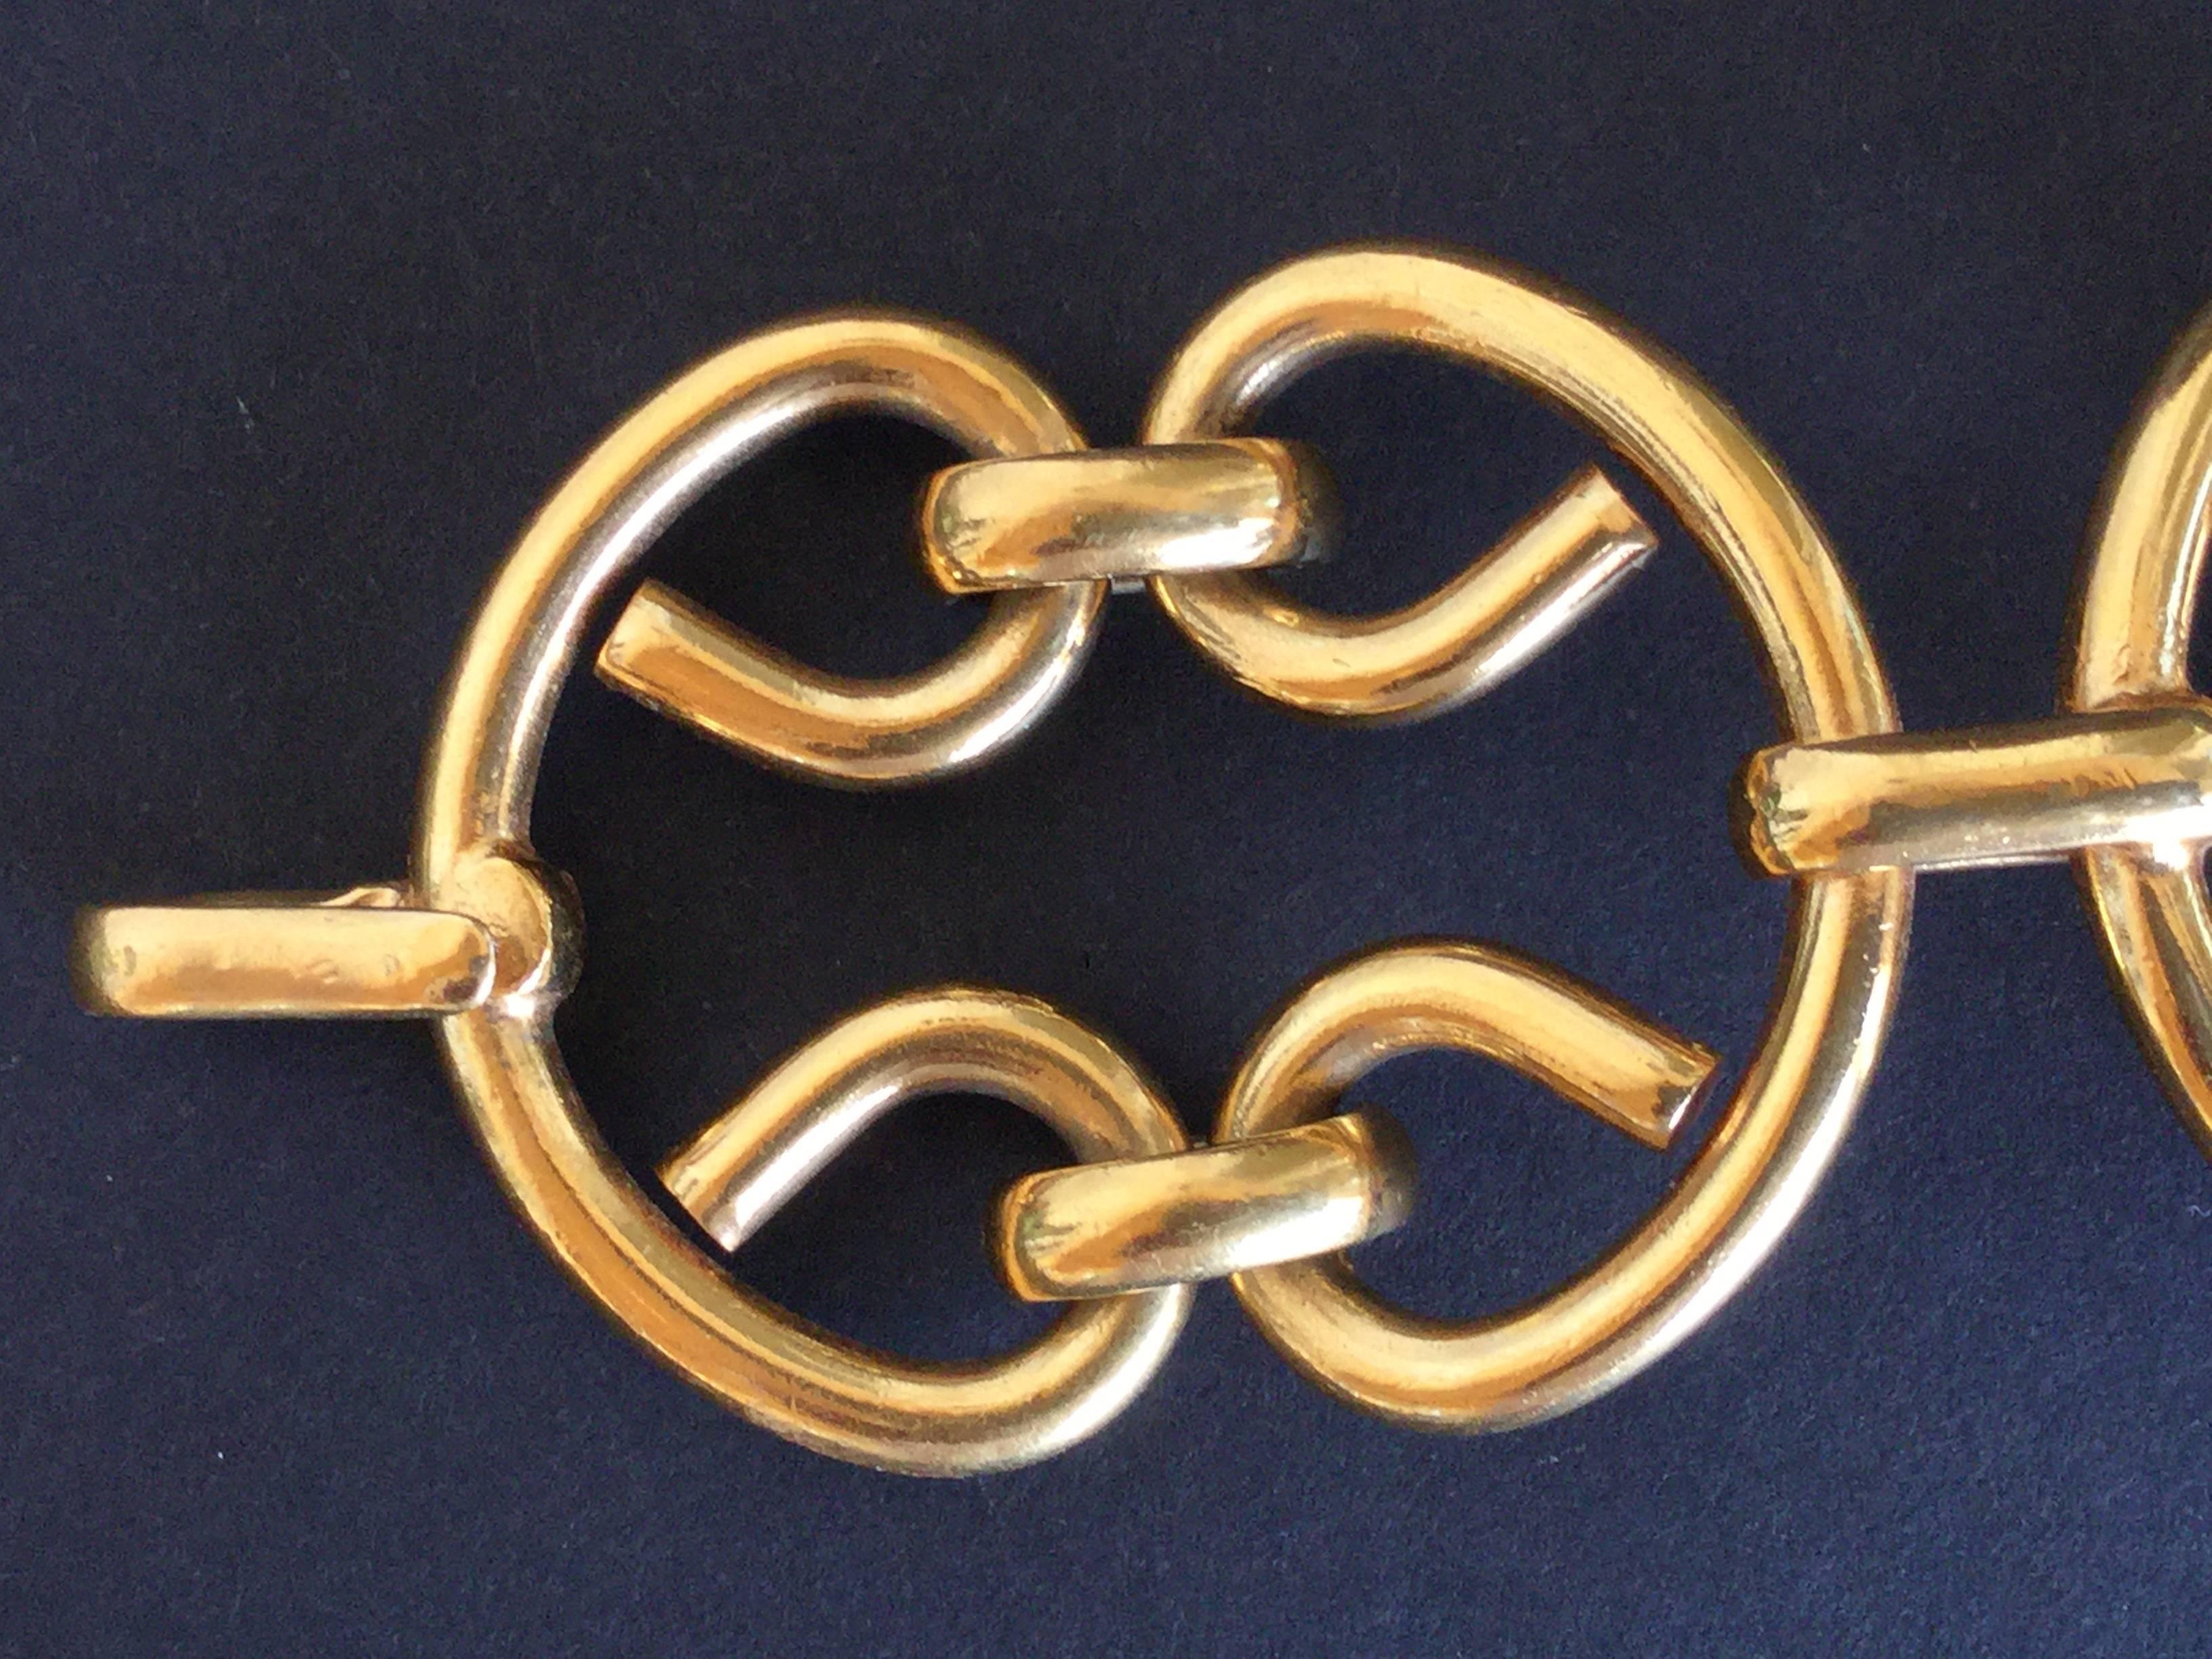 These older Chanel pieces just feel nothing like the newer ones! This gilt link bracelet is so solid and heavy. The gilding is quiet and restrained. Burnished instead of flashy like newer pieces can be. Simple but striking design dating from the